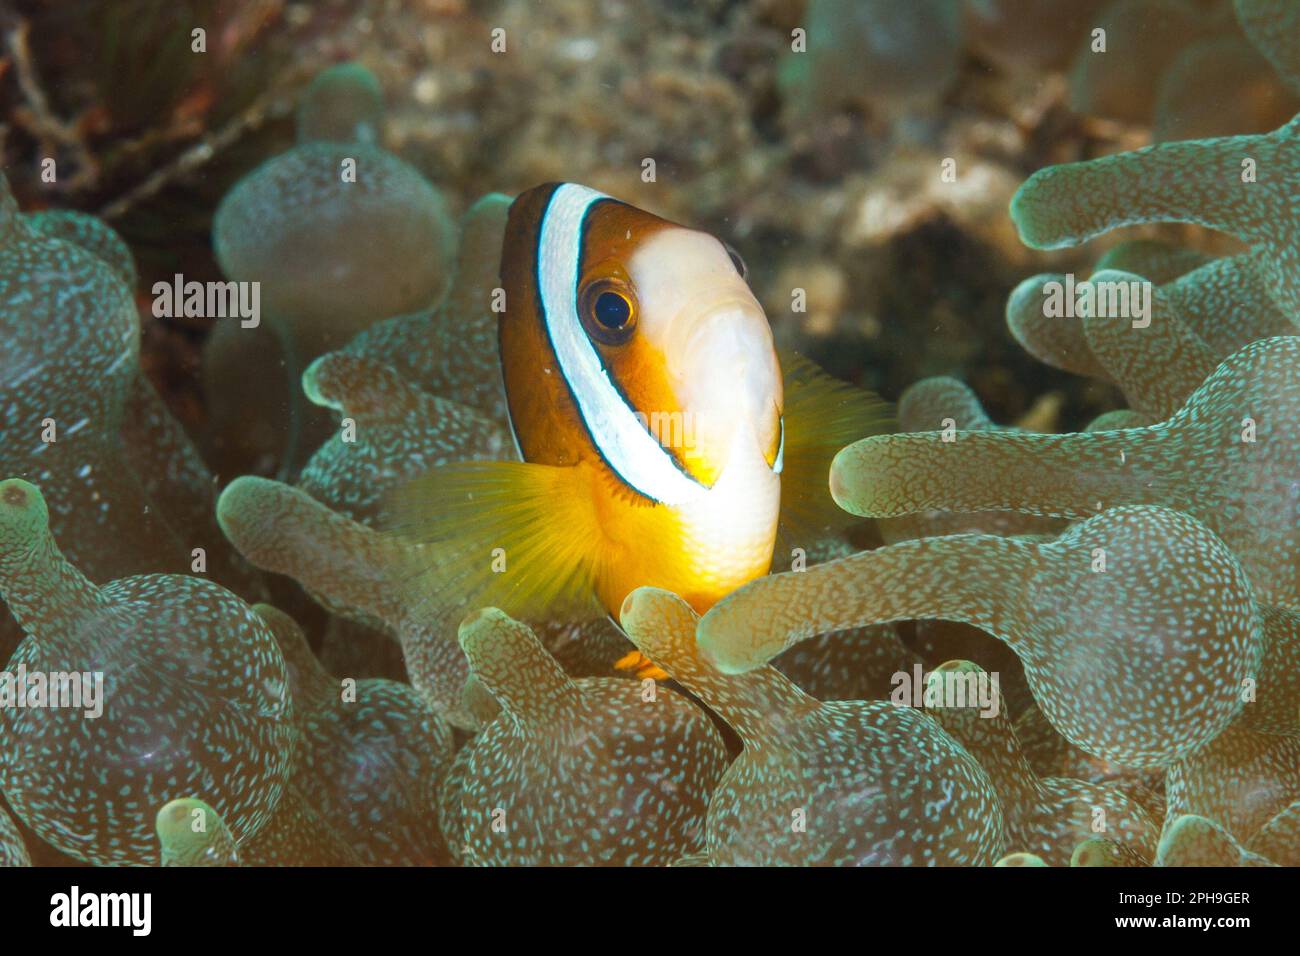 Clarks anemonefish (Amphiprion clarkii) Lembeh Strait, Sulawesi settentrionale, Indonesia. Foto Stock